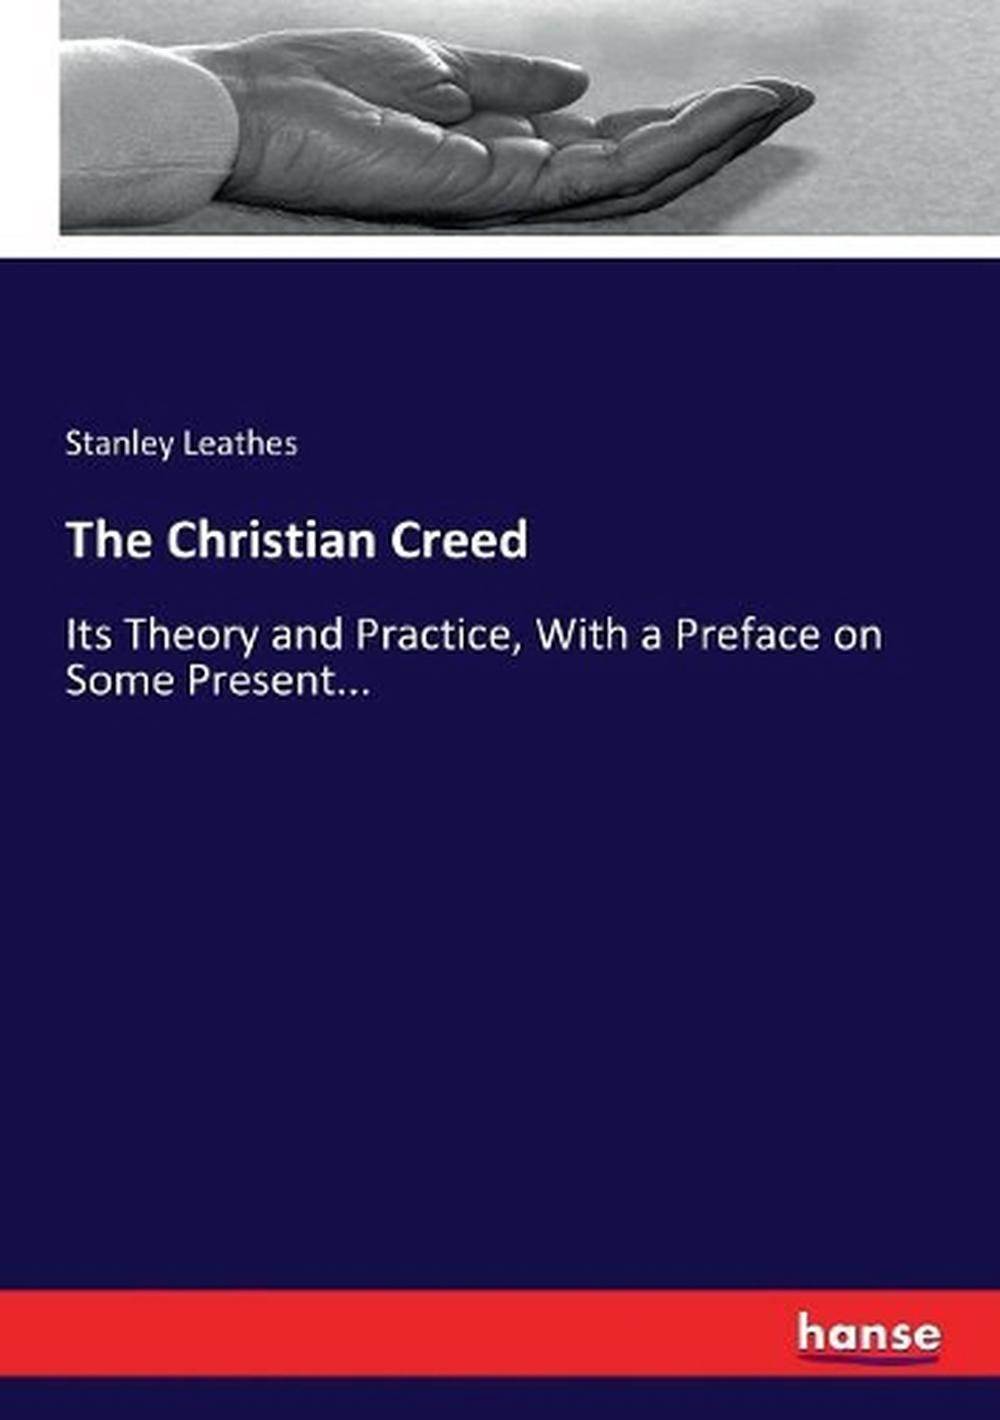 Christian Creed by Stanley Leathes (English) Paperback Book Free ...